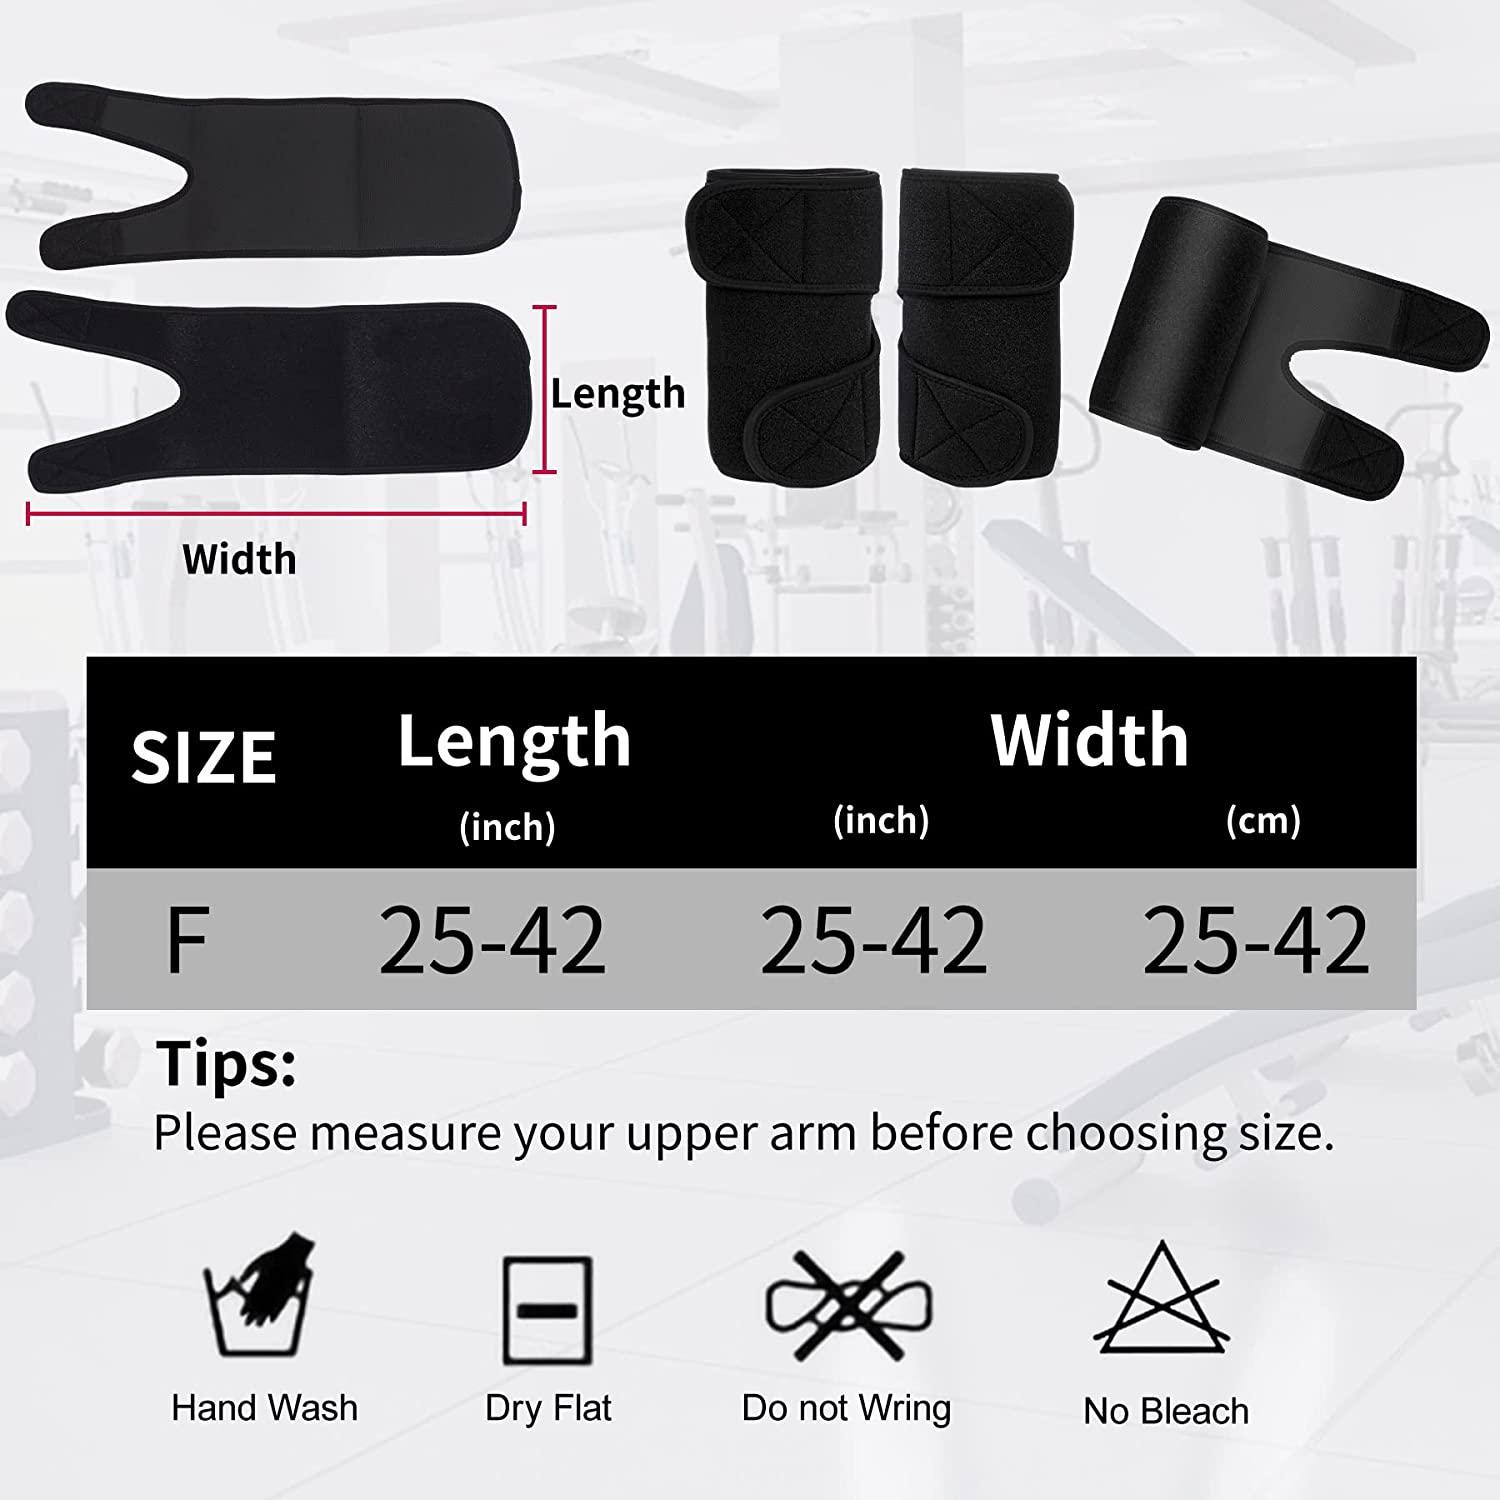 SUPERHOMUSE Armbands Body Shapers Neoprene Sauna Arm Warmers Slimmer Sleeve  Trimmers Wraps For Lose Fat Arm Shaper Weight Loss 